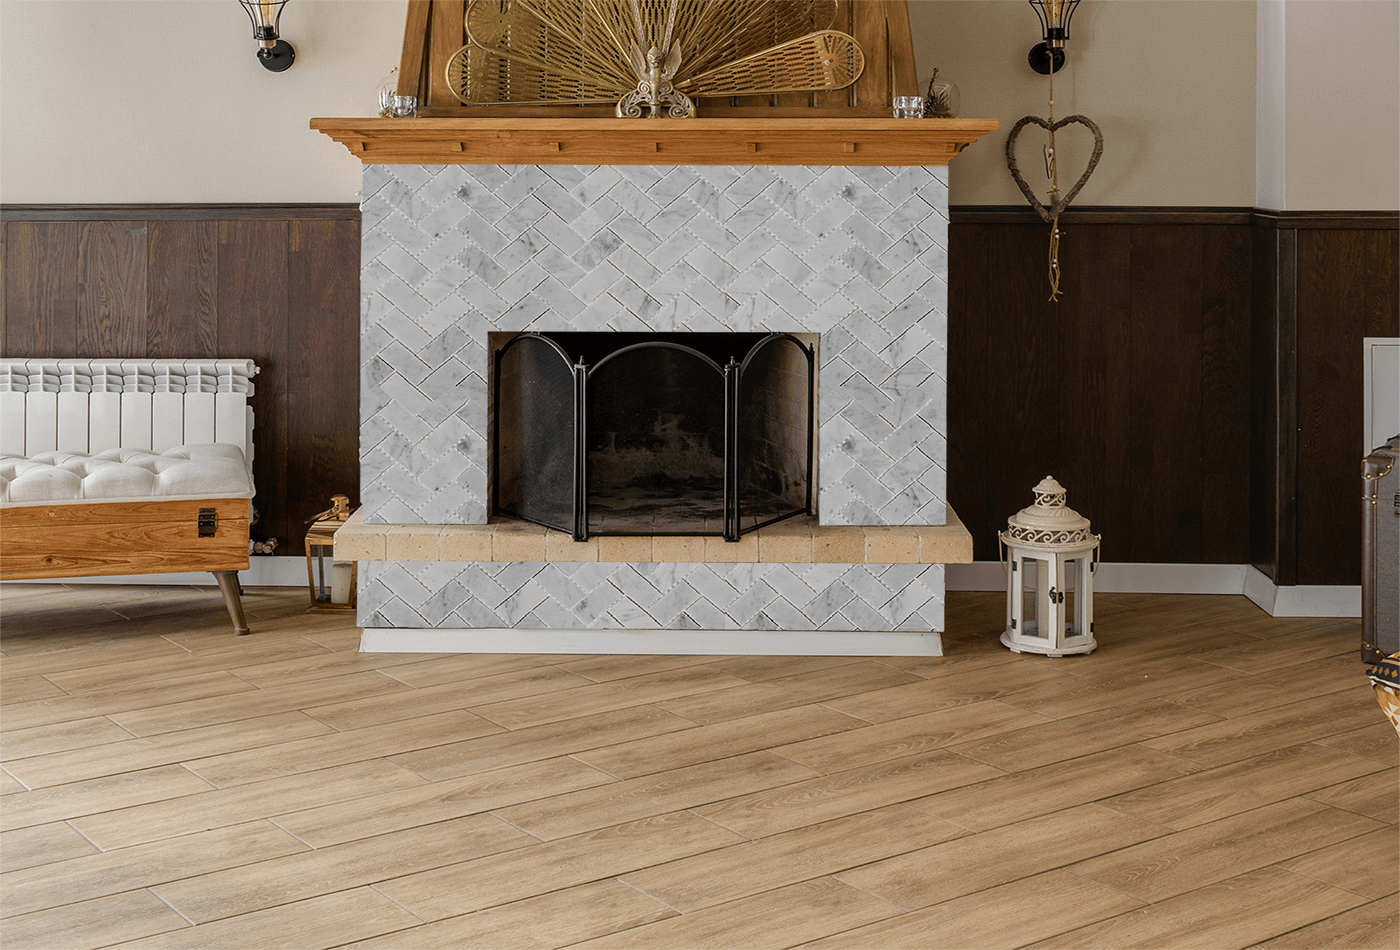 Is Fireplace the Perfect Stone to Install